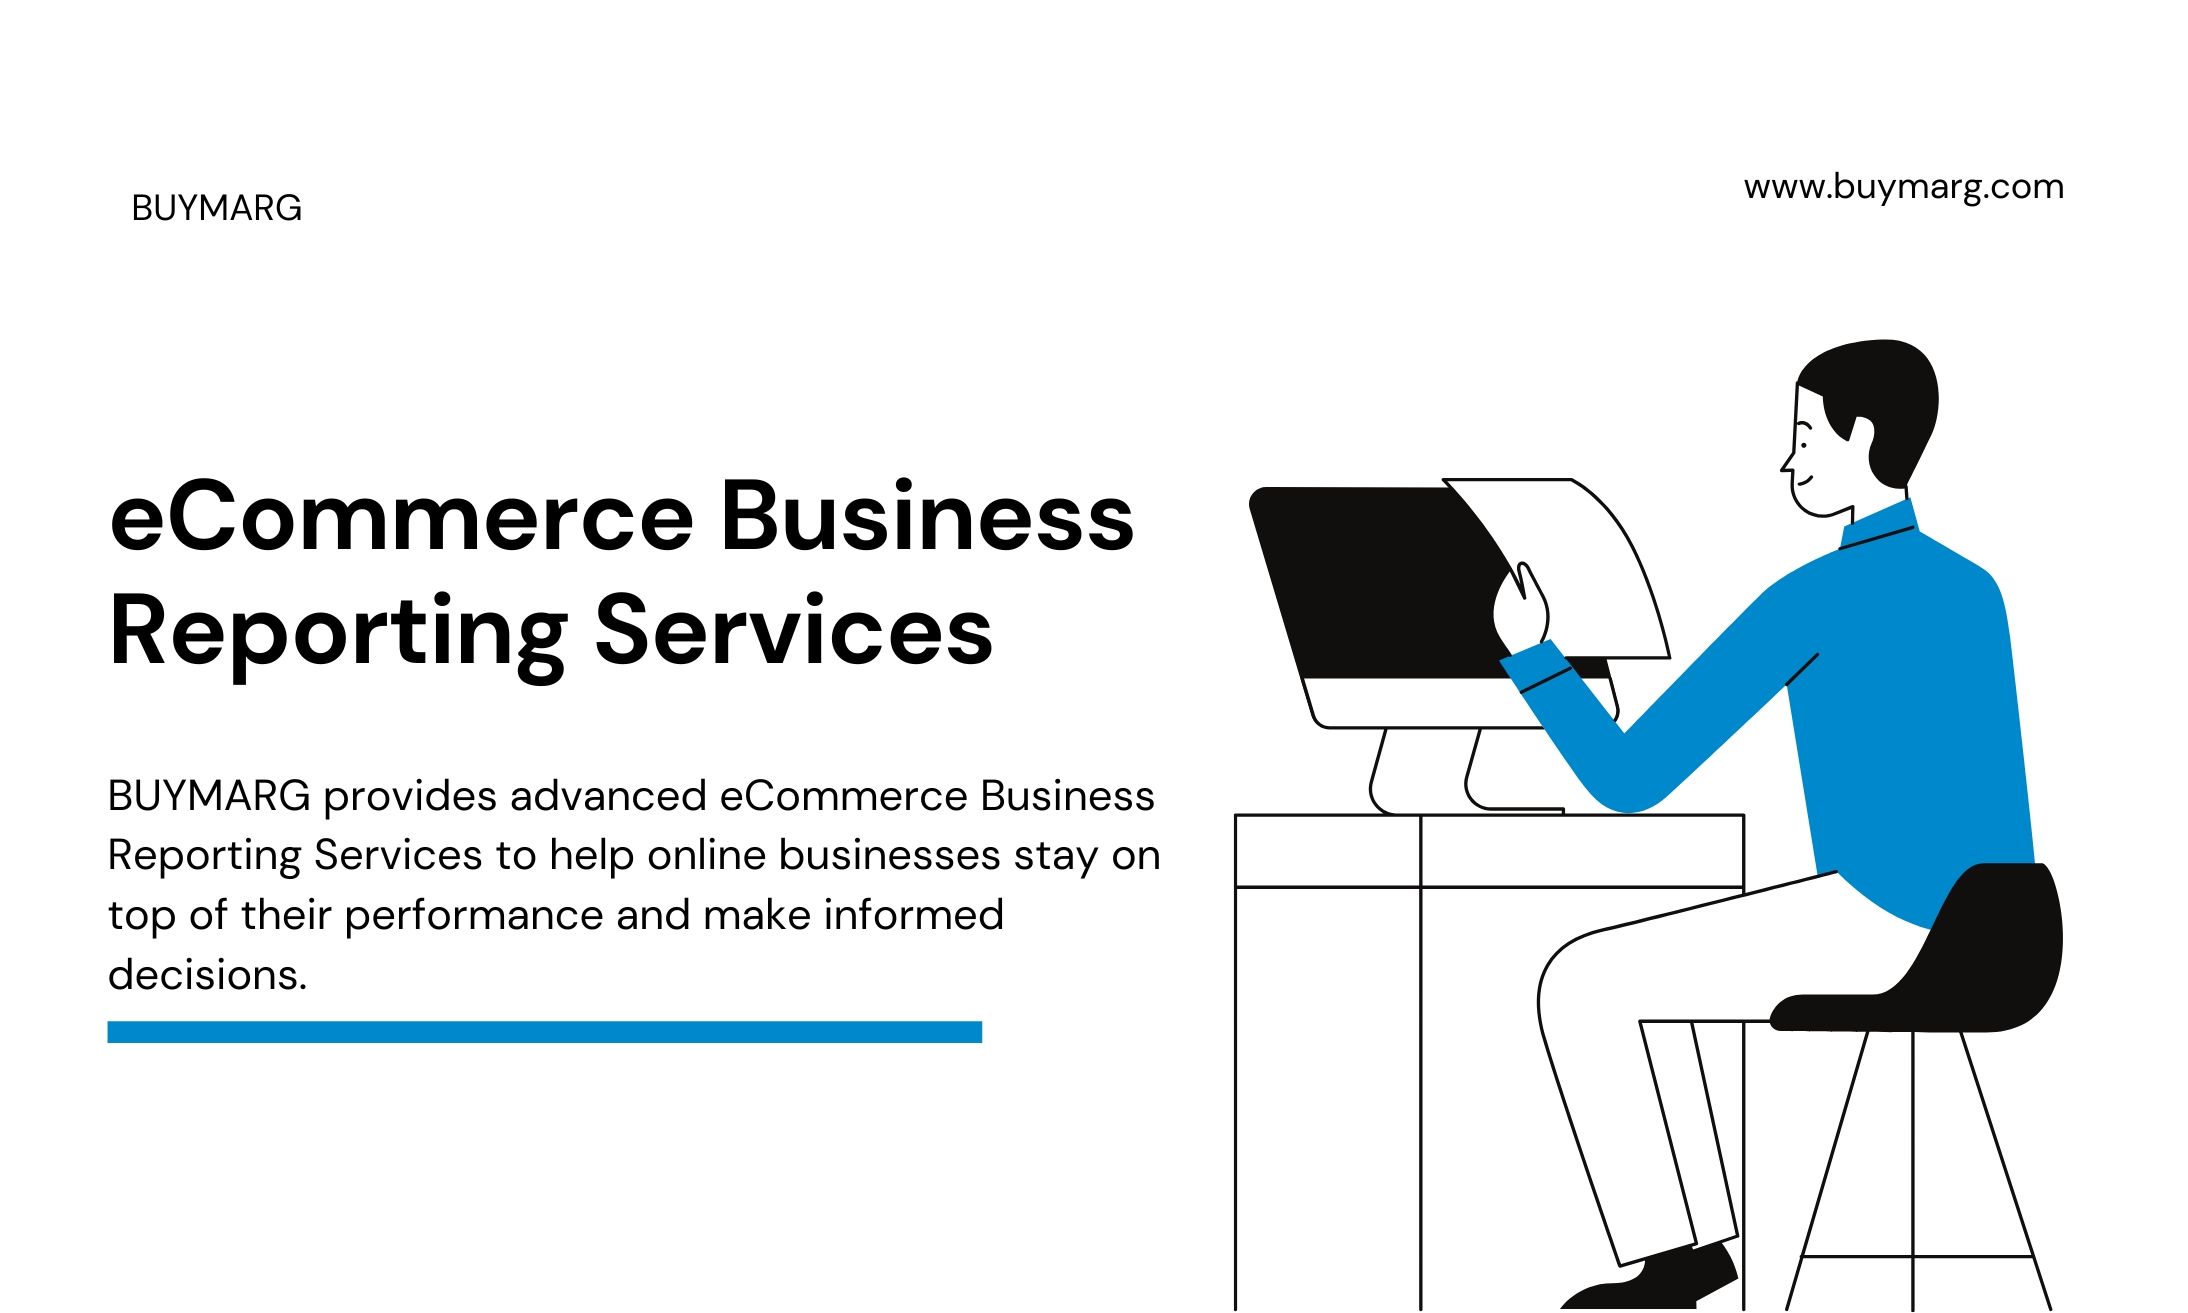 eCommerce Business Reporting Services